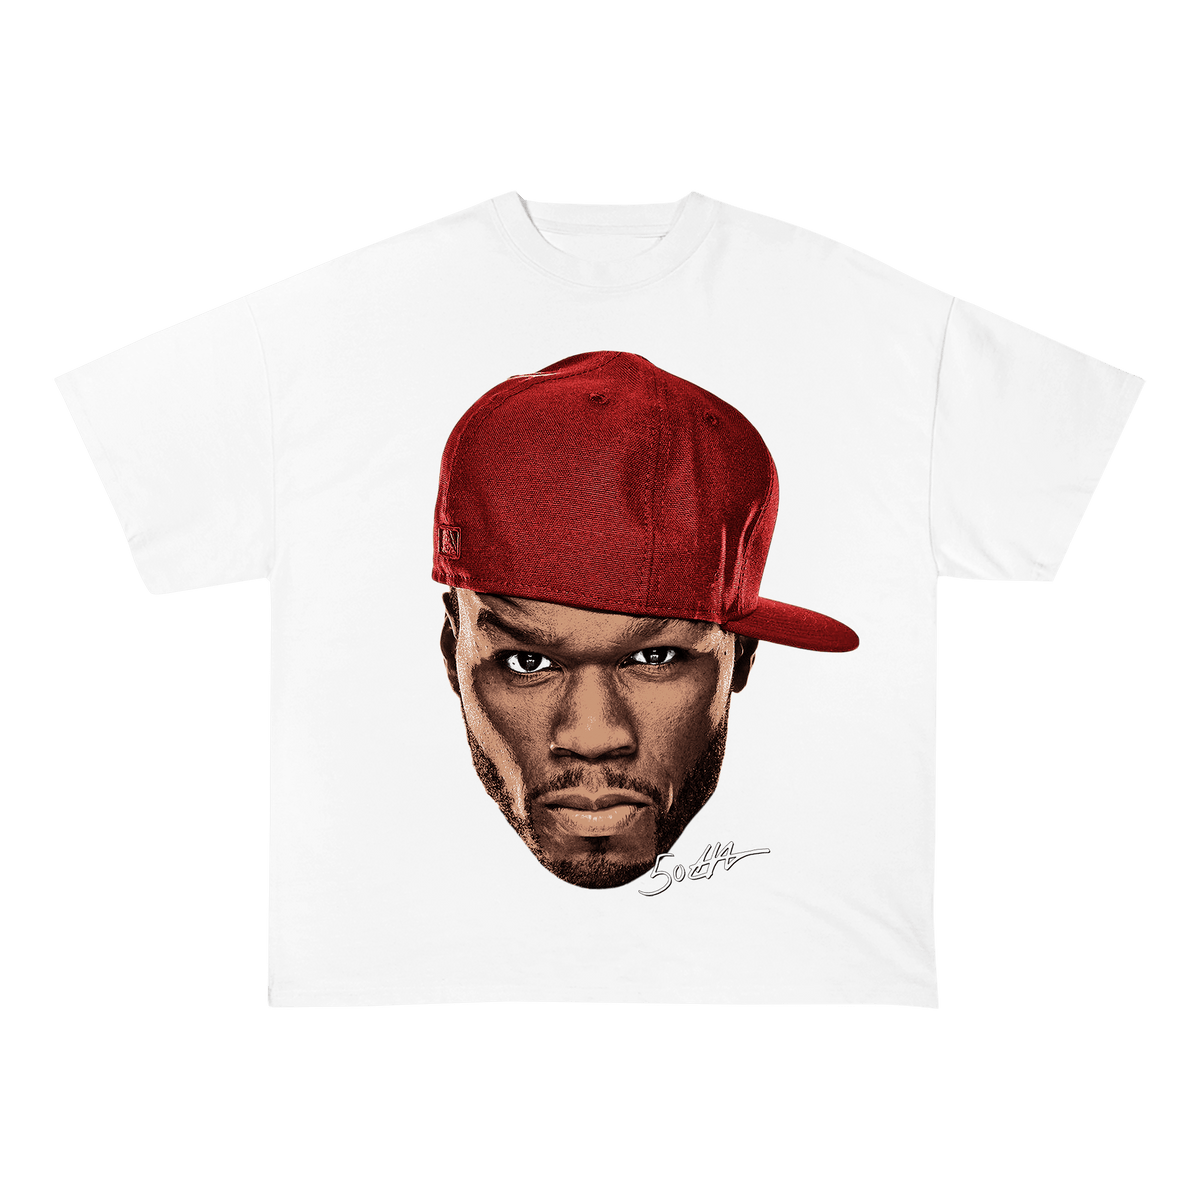 RDMCLOTHINGART tapestry hoodie 50CENT WEIGHT COTTON TEE-8028